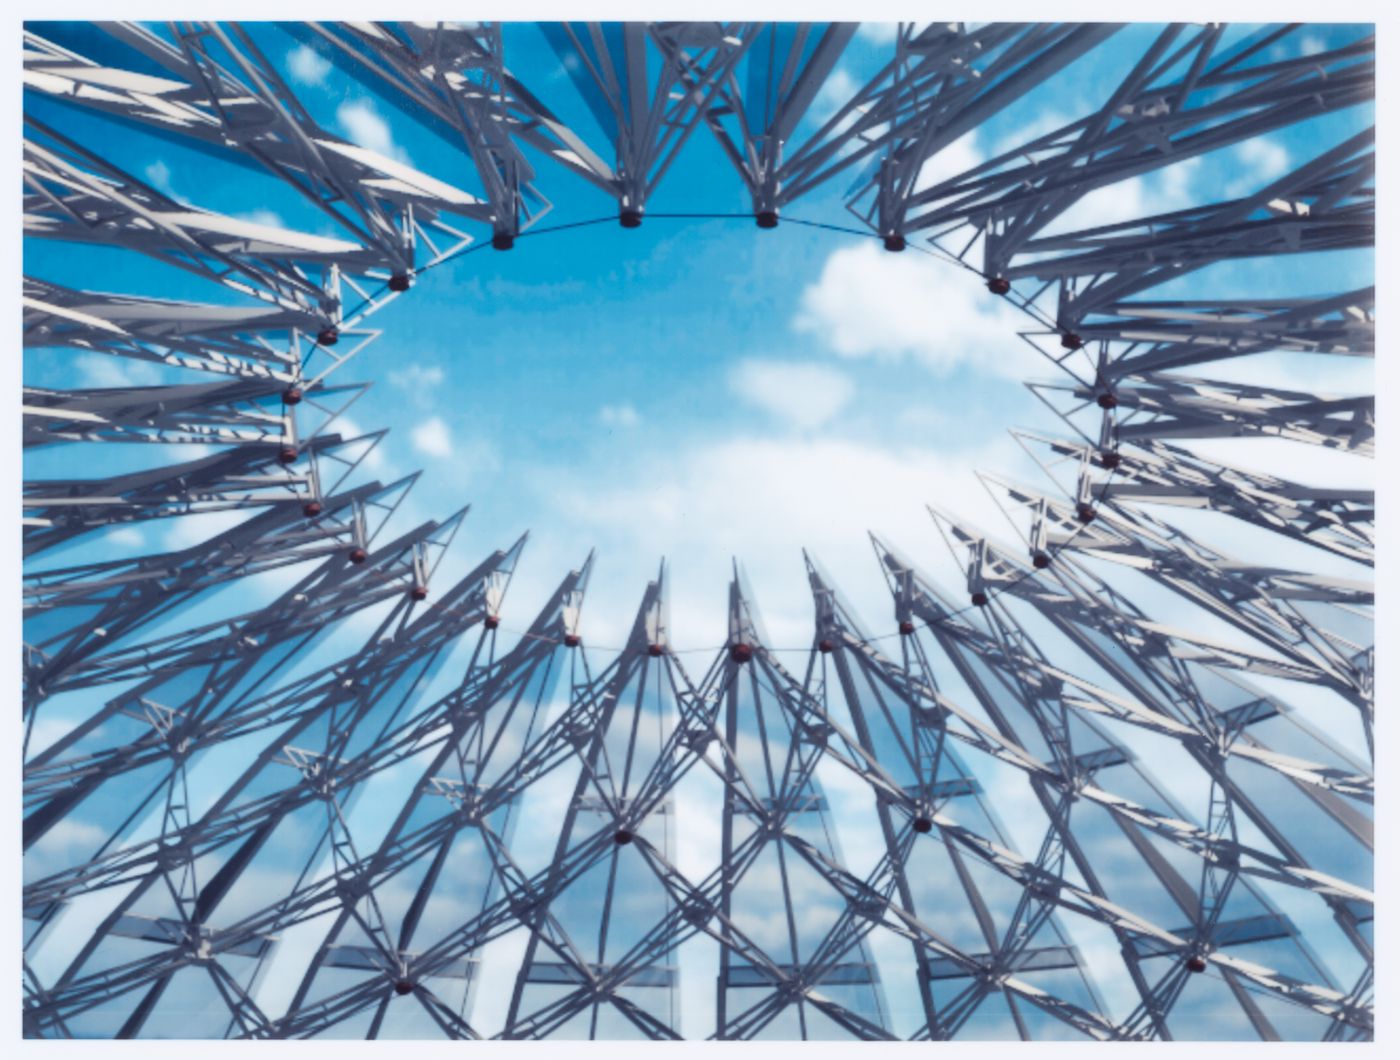 Iris Dome photos and study for a retractable stadium roof